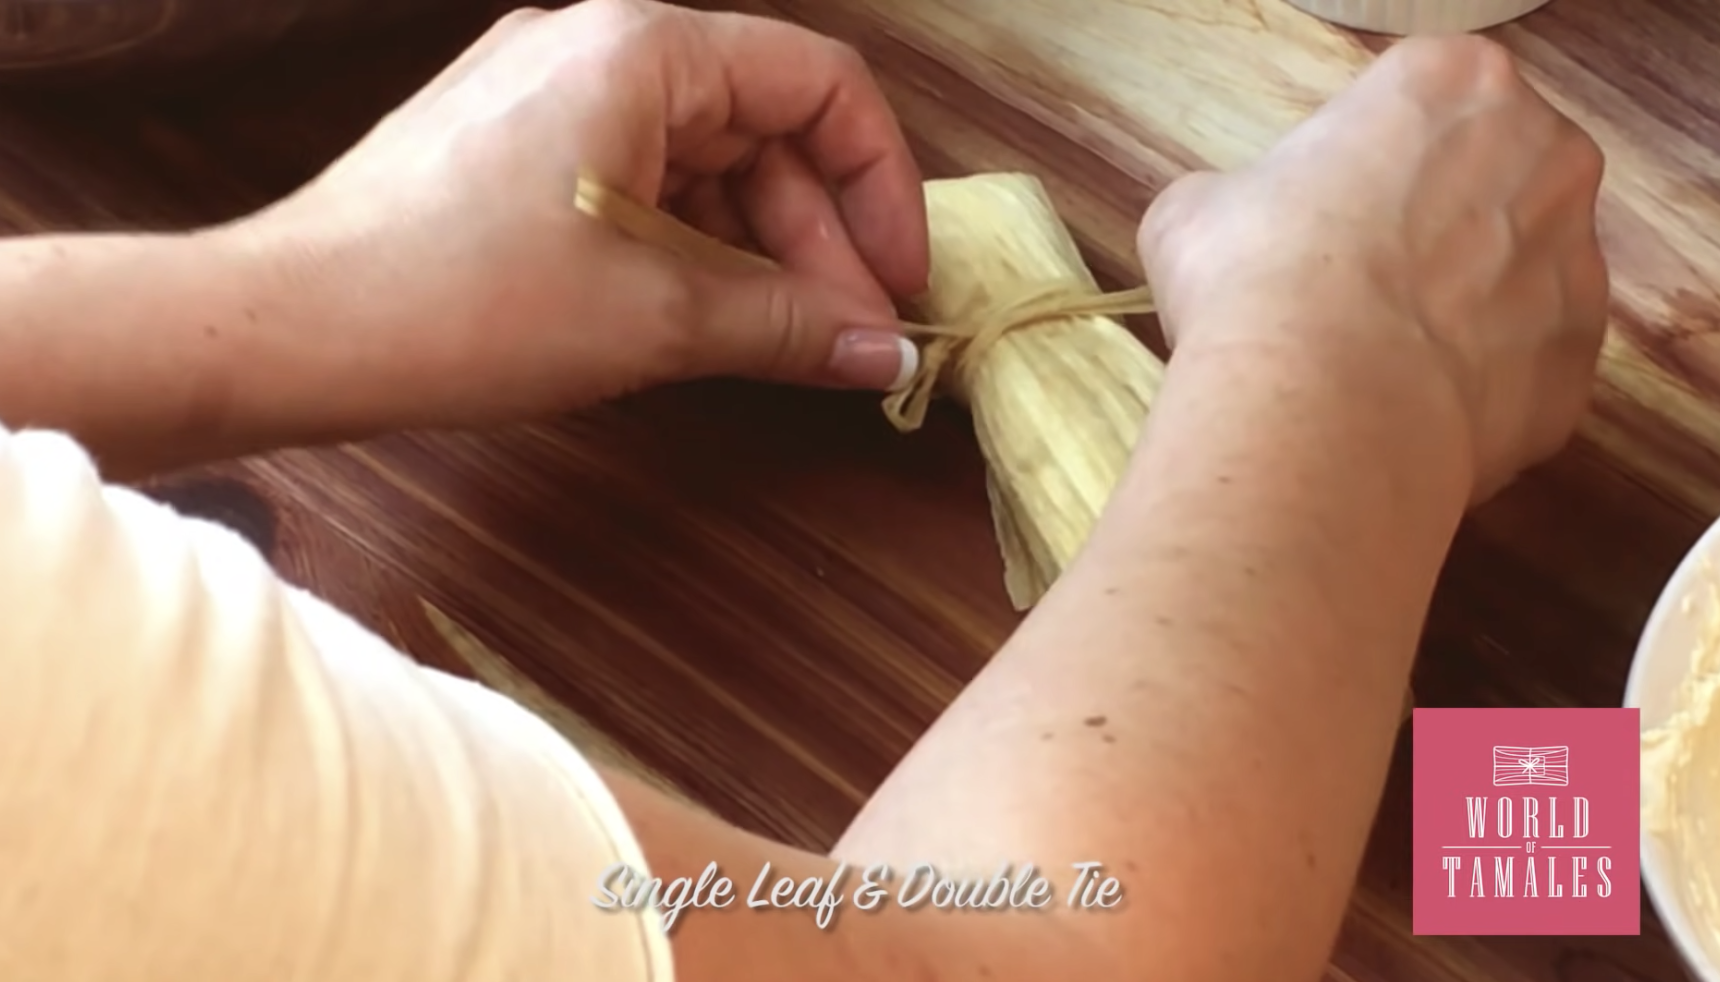 A tamale being tied with the words &quot;Single leaf and double tie&quot;